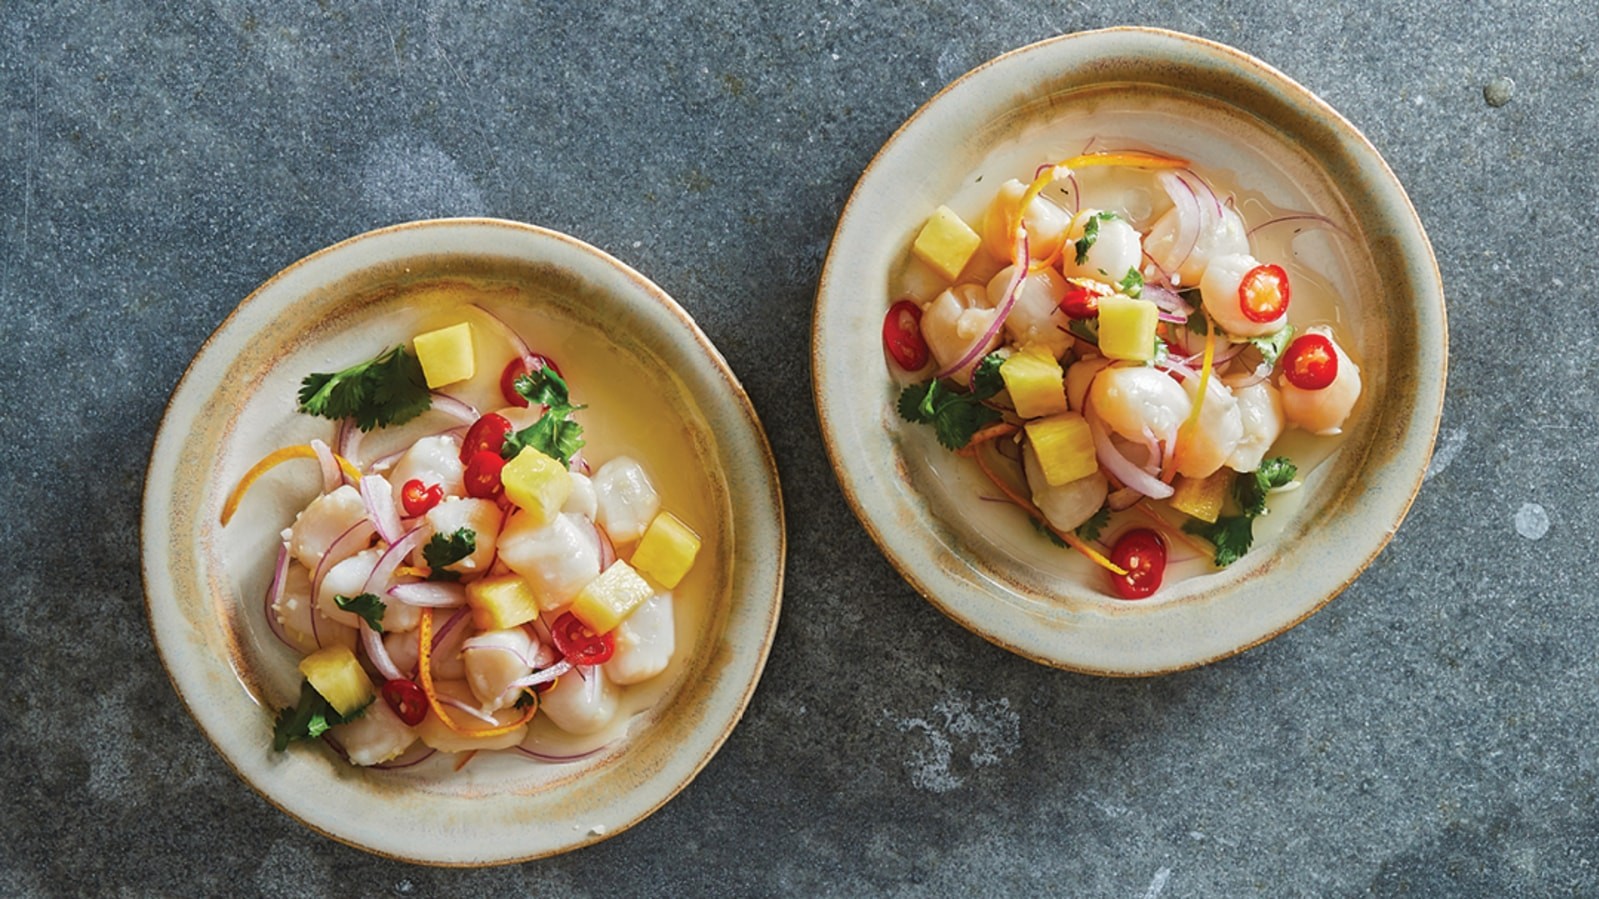 Image of Pineapple-Lime-Ginger Scallop Ceviche